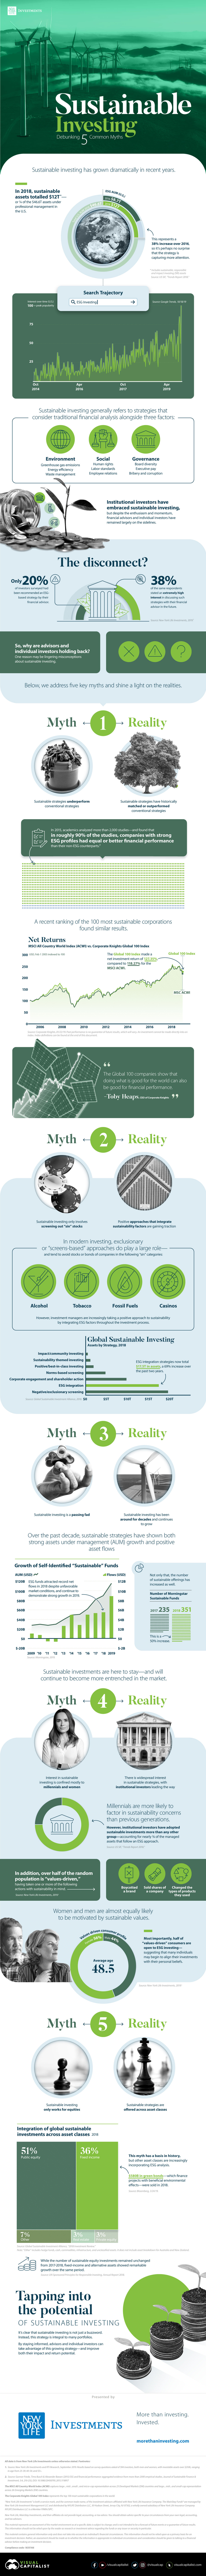 Sustainable Investing Infographic